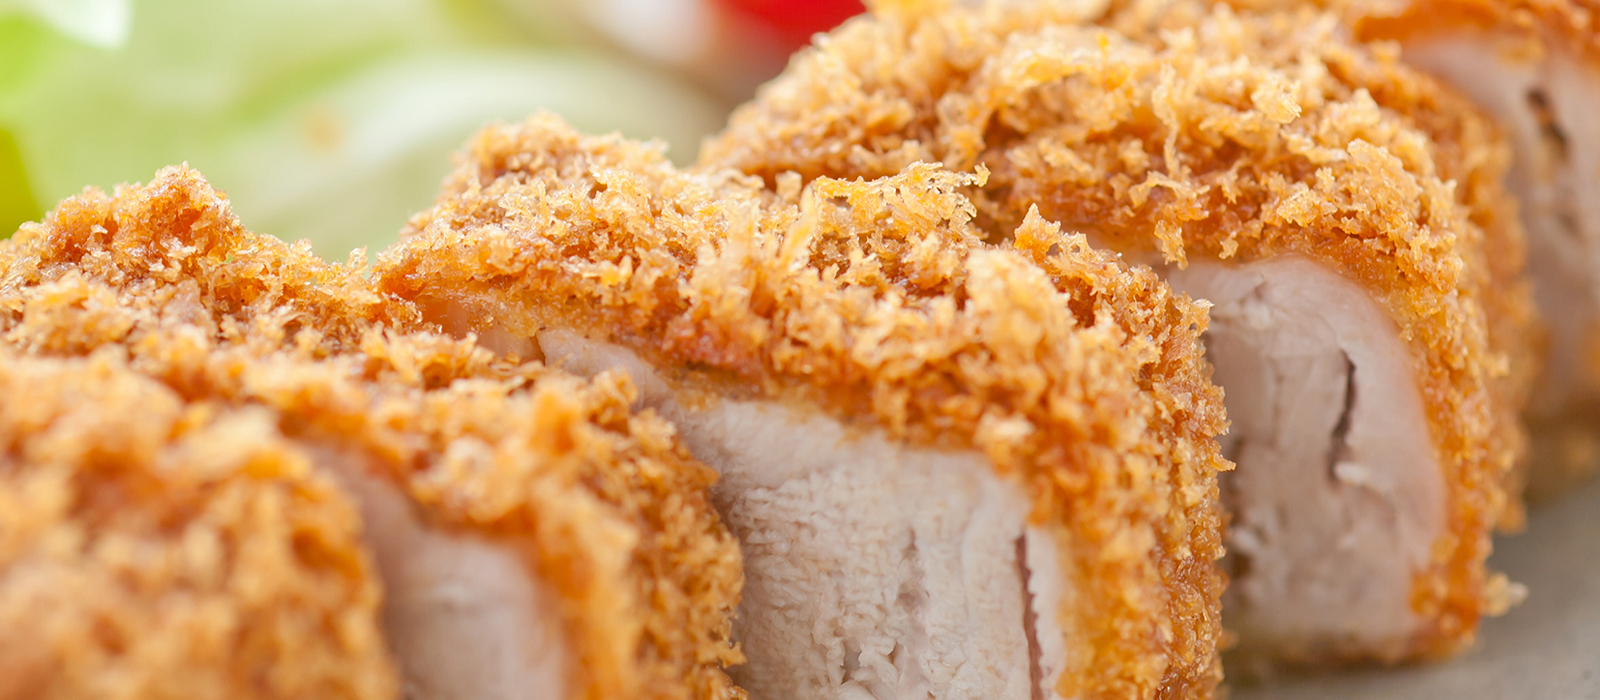 Enjoy our thick tonkatsu, full of meaty flavor that fills your mouth as you chew.
